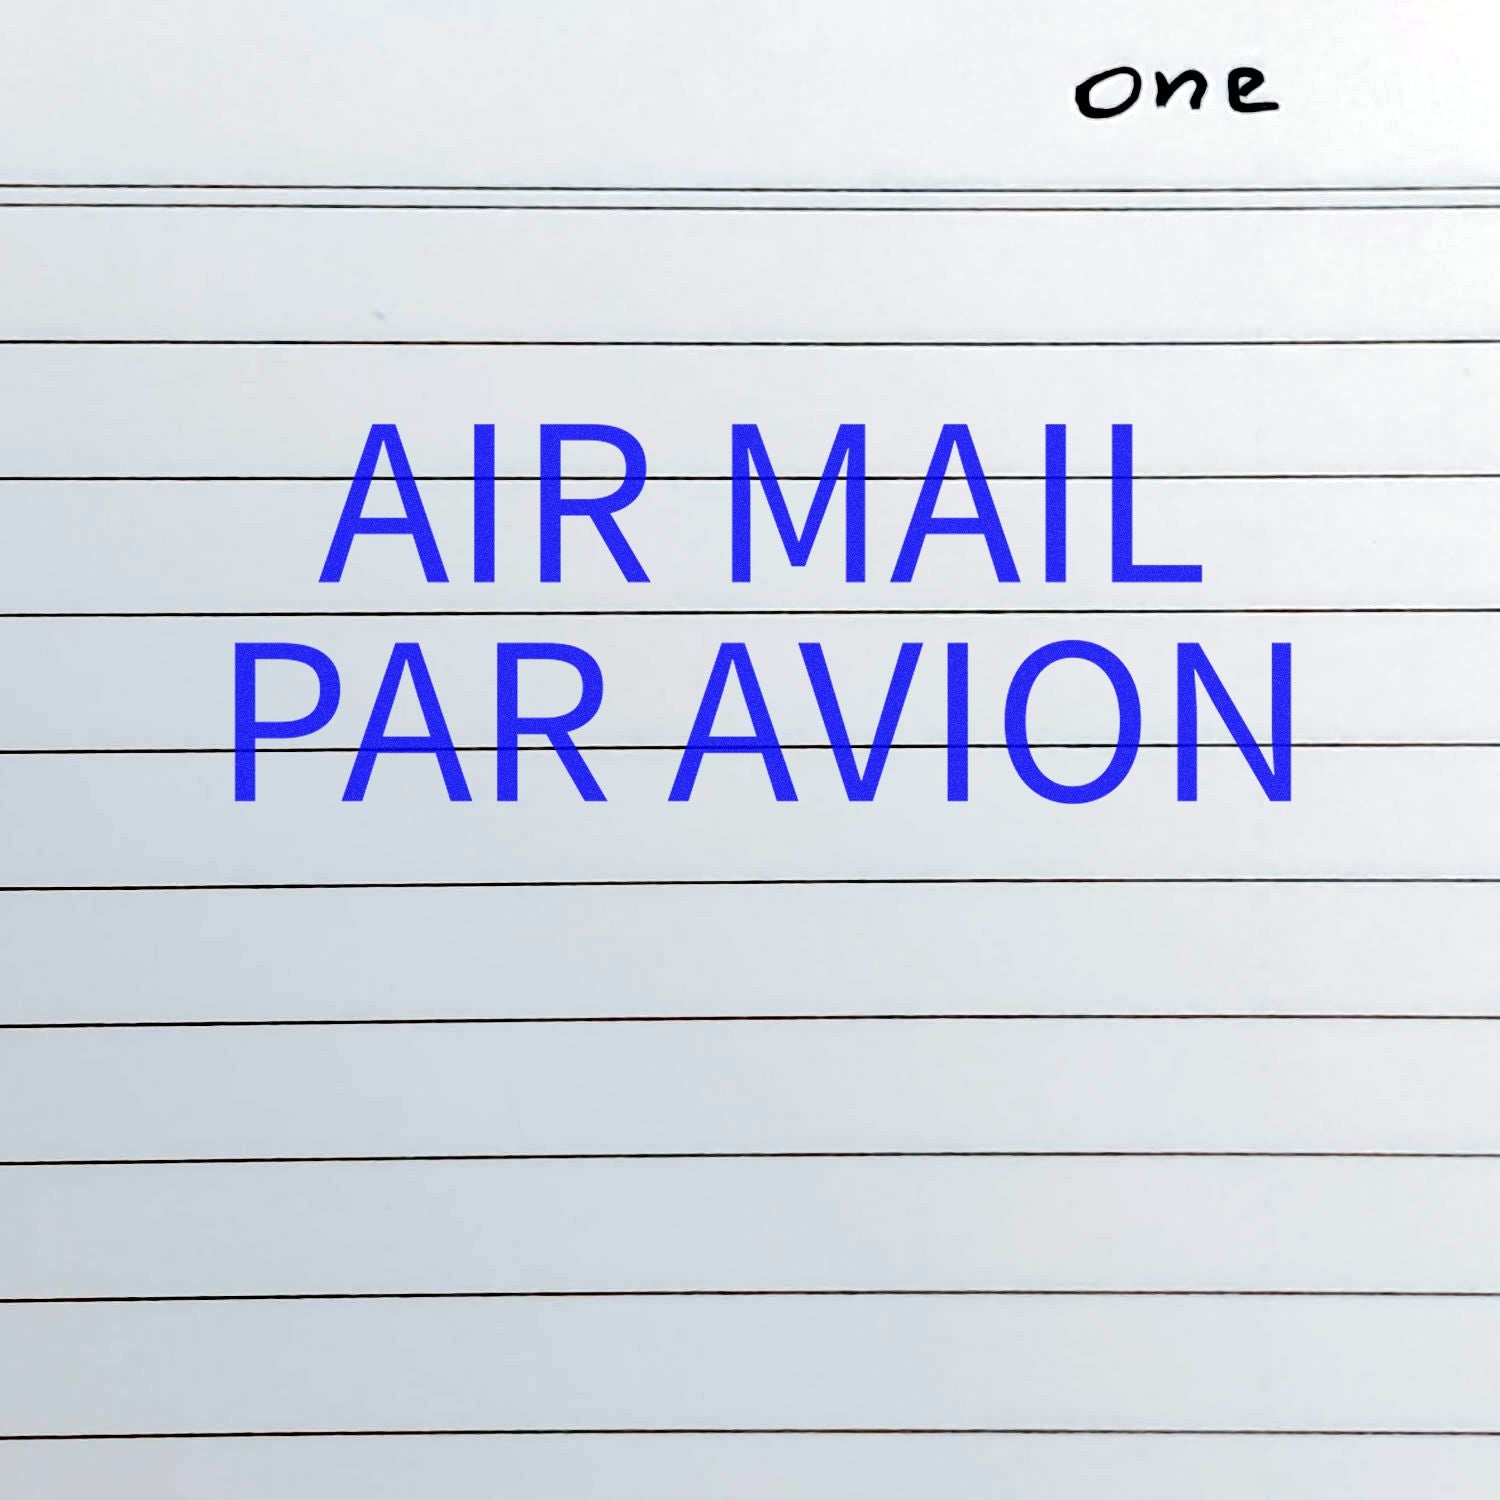 Large Self-Inking Air Mail Par Avion Stamp In Use Photo